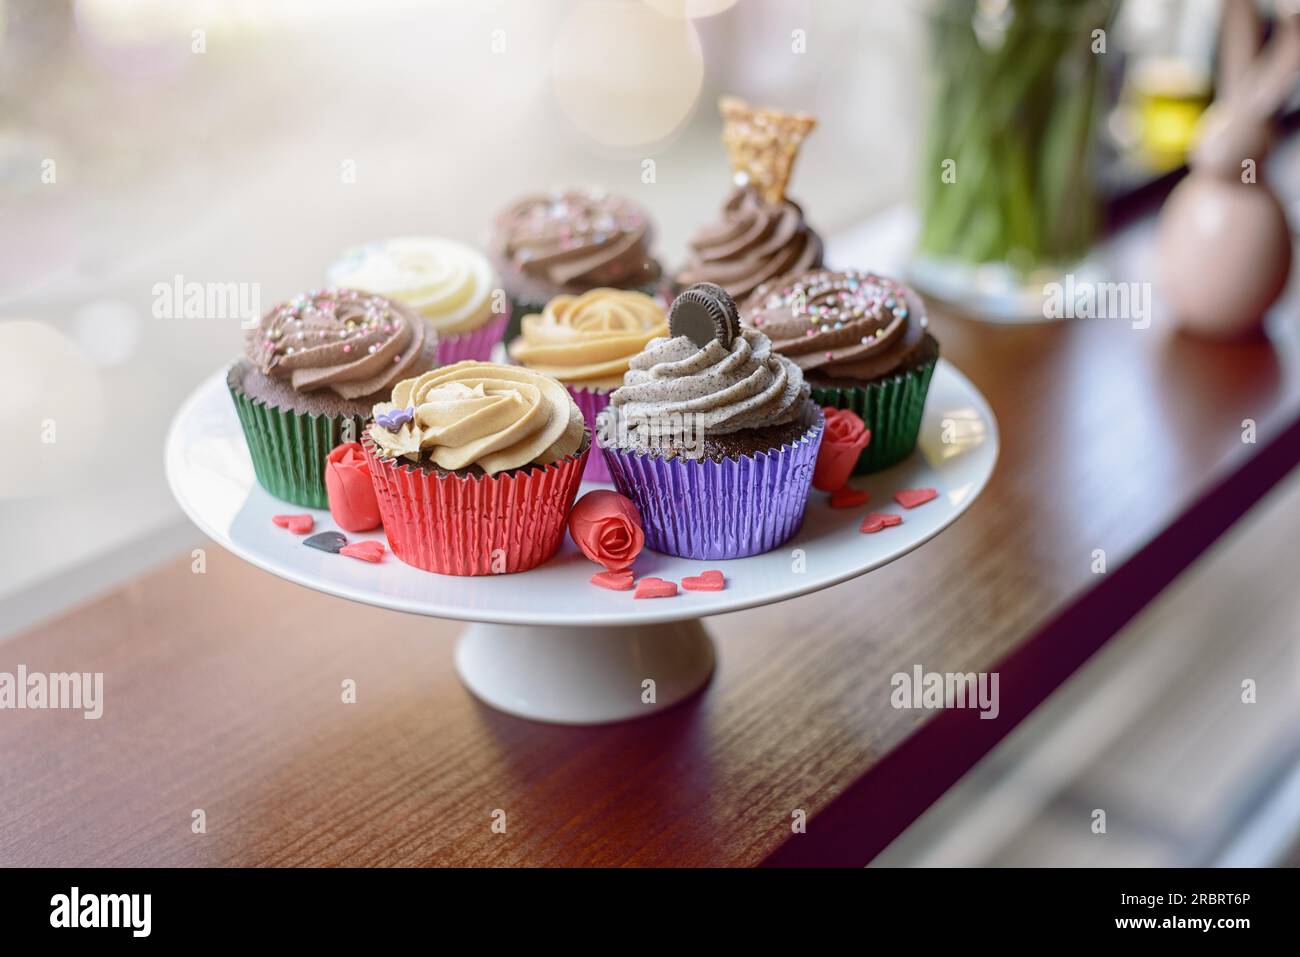 Eight deliciously sweet cupcakes covered with creamed chocolate, vanilla and various other garnishments alongside little pink heart candies Stock Photo